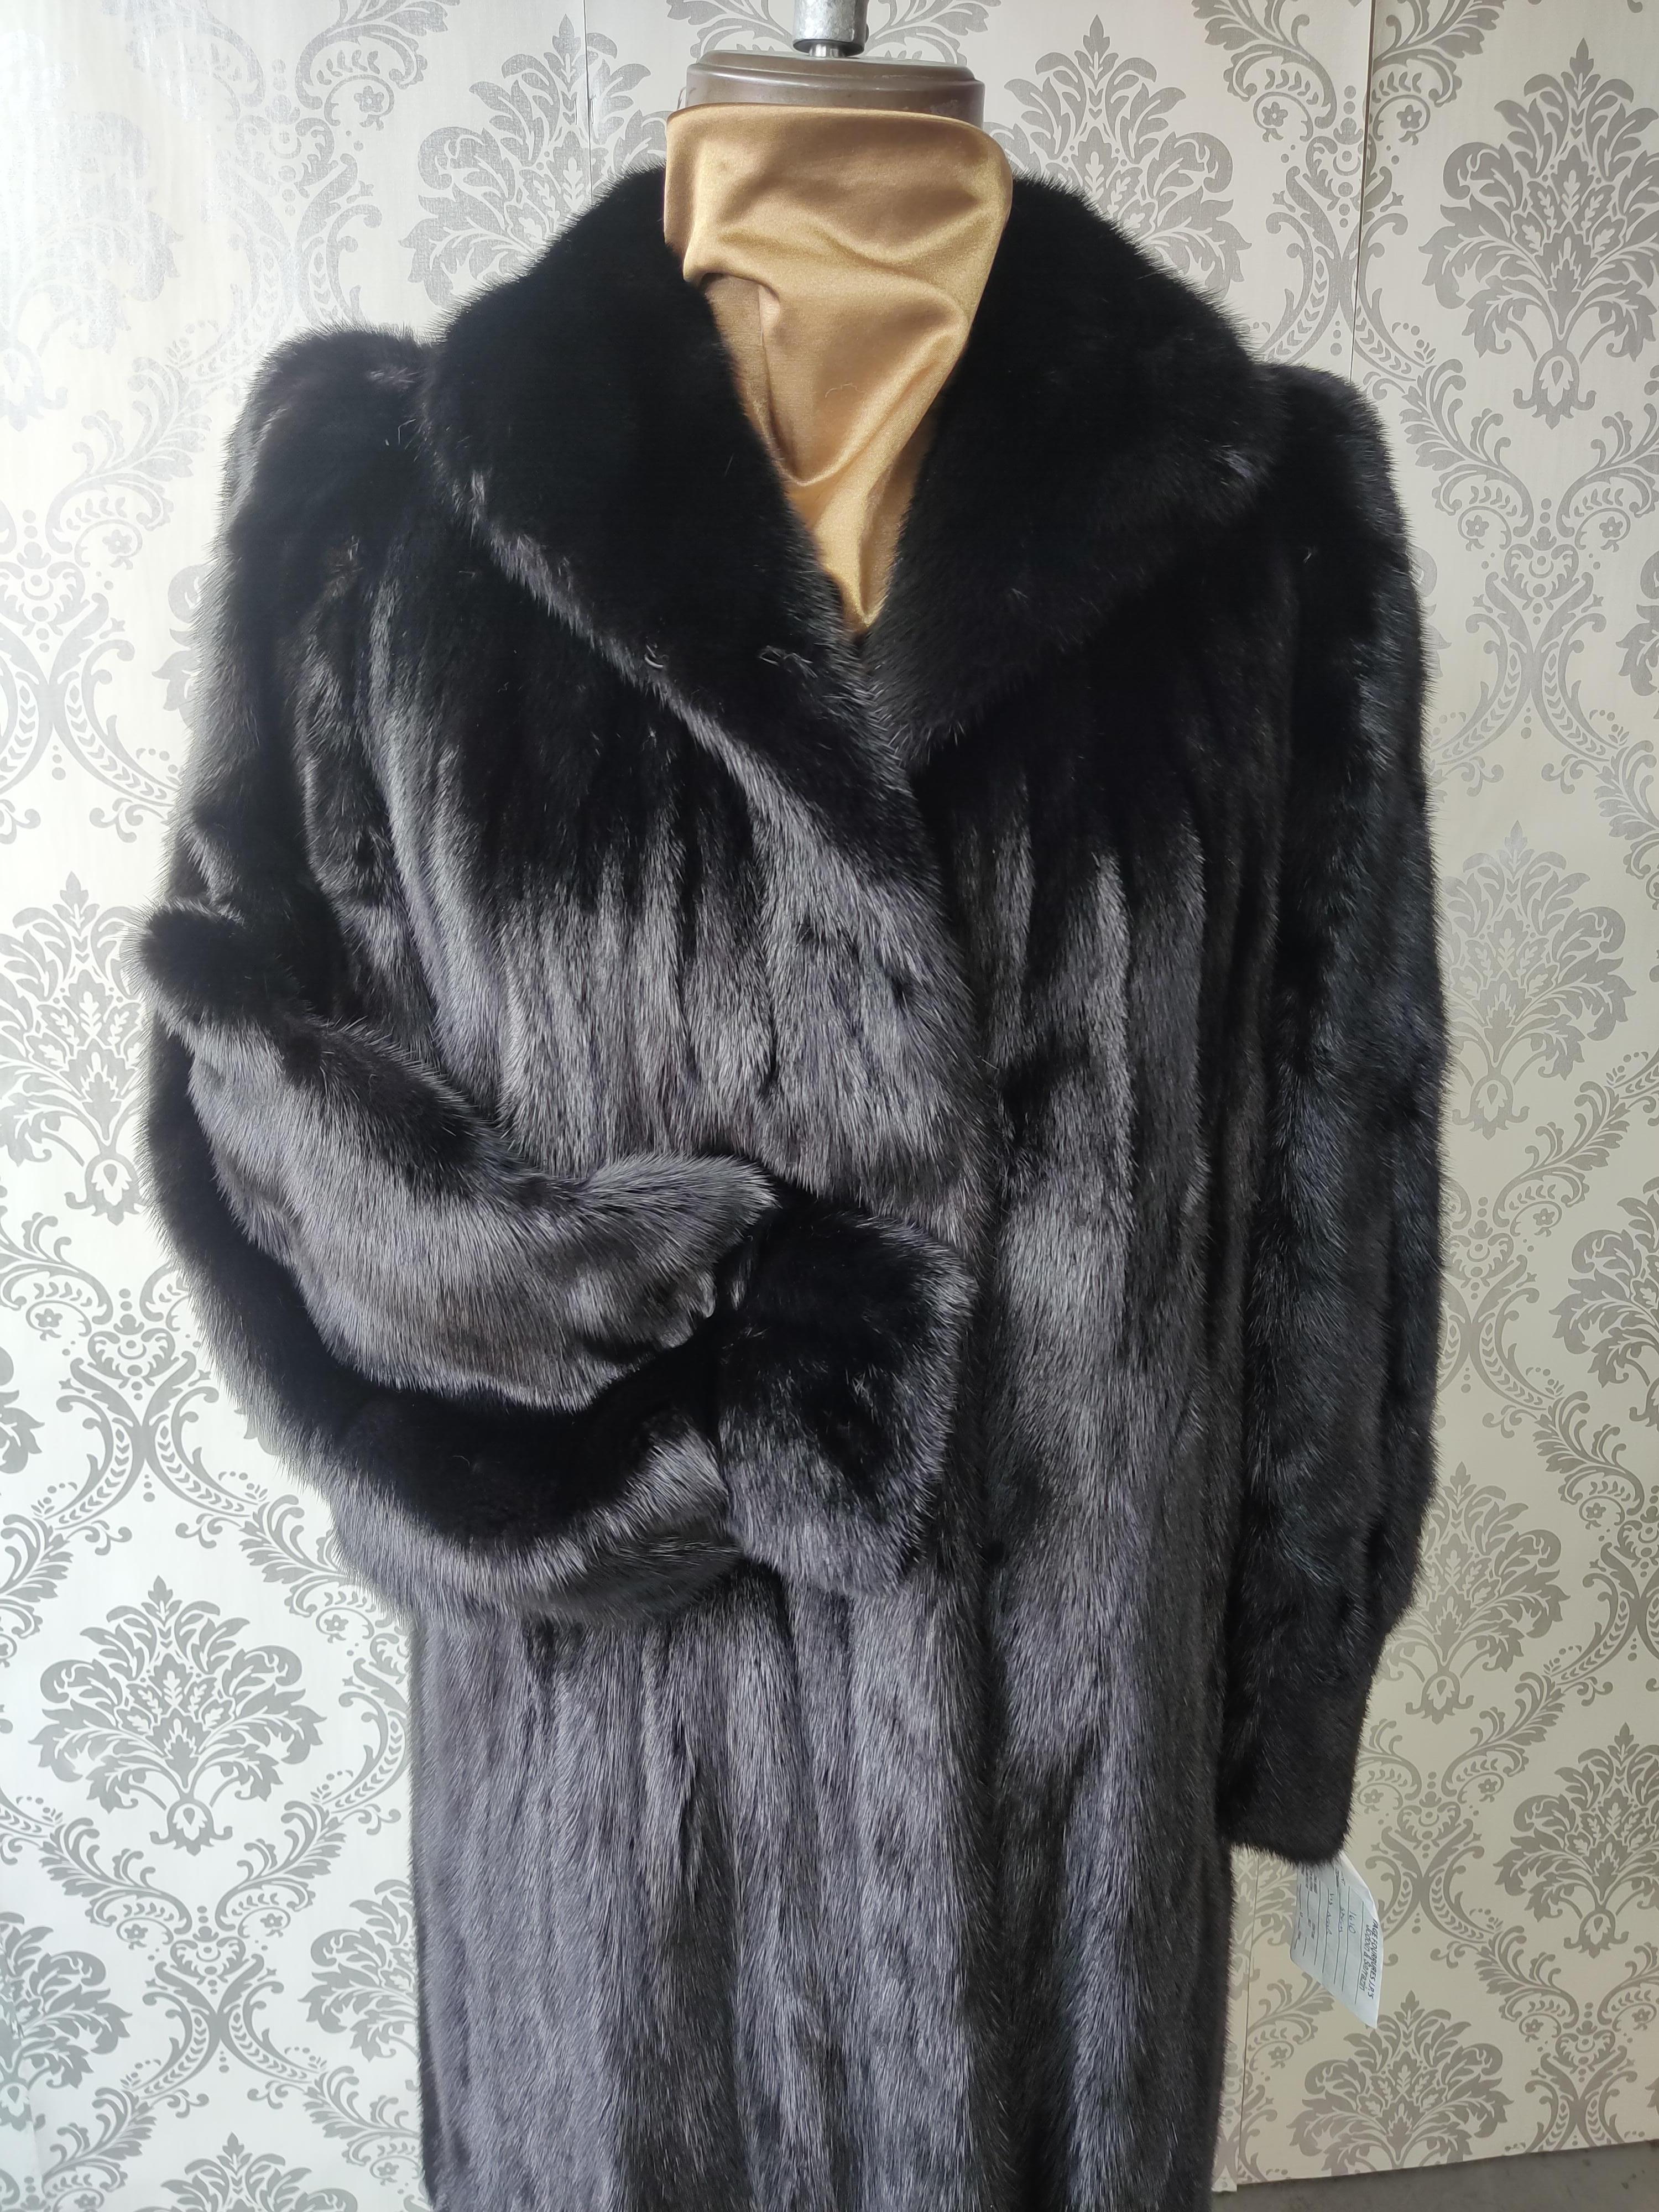 PRODUCT DESCRIPTION:

Brand new Christian Dior black mink fur coat with fluted sleeves 

Condition: New

Closure: Hooks & Eyes

Color: Black

Material: Black female opal mink 

Garment type: long length Coat

Sleeves: Dolman with fluted